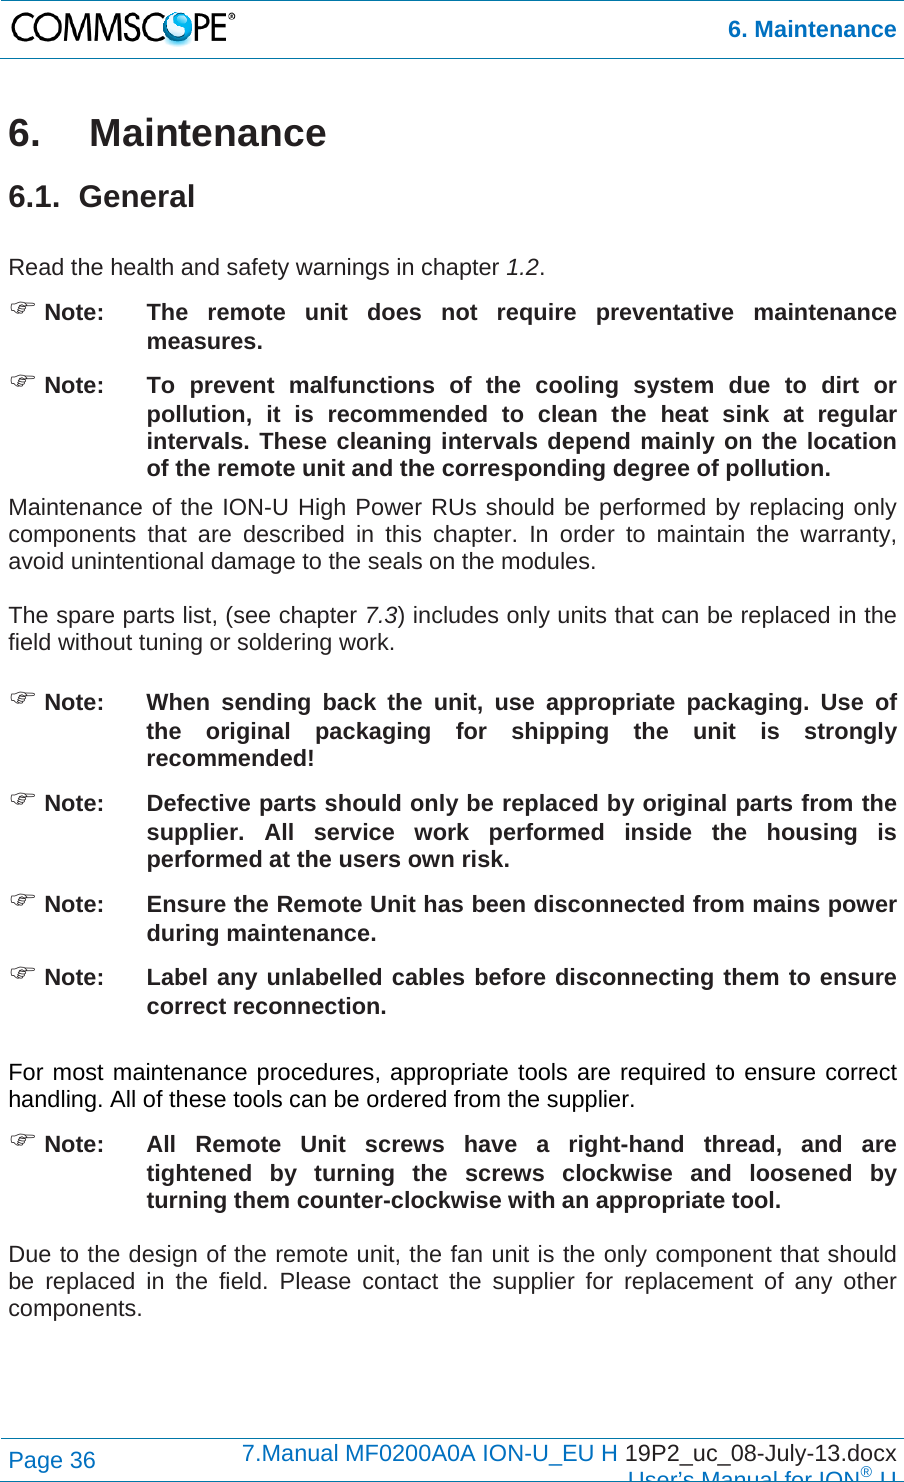  6. Maintenance Page 36  7.Manual MF0200A0A ION-U_EU H 19P2_uc_08-July-13.docx  User’s Manual for ION®U 6.  Maintenance 6.1. General  Read the health and safety warnings in chapter 1.2.  Note:  The remote unit does not require preventative maintenance measures.  Note:  To prevent malfunctions of the cooling system due to dirt or pollution, it is recommended to clean the heat sink at regular intervals. These cleaning intervals depend mainly on the location of the remote unit and the corresponding degree of pollution. Maintenance of the ION-U High Power RUs should be performed by replacing only components that are described in this chapter. In order to maintain the warranty, avoid unintentional damage to the seals on the modules.  The spare parts list, (see chapter 7.3) includes only units that can be replaced in the field without tuning or soldering work.   Note:  When sending back the unit, use appropriate packaging. Use of the original packaging for shipping the unit is strongly recommended!  Note:  Defective parts should only be replaced by original parts from the supplier. All service work performed inside the housing is performed at the users own risk.  Note:  Ensure the Remote Unit has been disconnected from mains power during maintenance.  Note:  Label any unlabelled cables before disconnecting them to ensure correct reconnection.  For most maintenance procedures, appropriate tools are required to ensure correct handling. All of these tools can be ordered from the supplier.   Note:   All Remote Unit screws have a right-hand thread, and are tightened by turning the screws clockwise and loosened by turning them counter-clockwise with an appropriate tool.  Due to the design of the remote unit, the fan unit is the only component that should be replaced in the field. Please contact the supplier for replacement of any other components.  